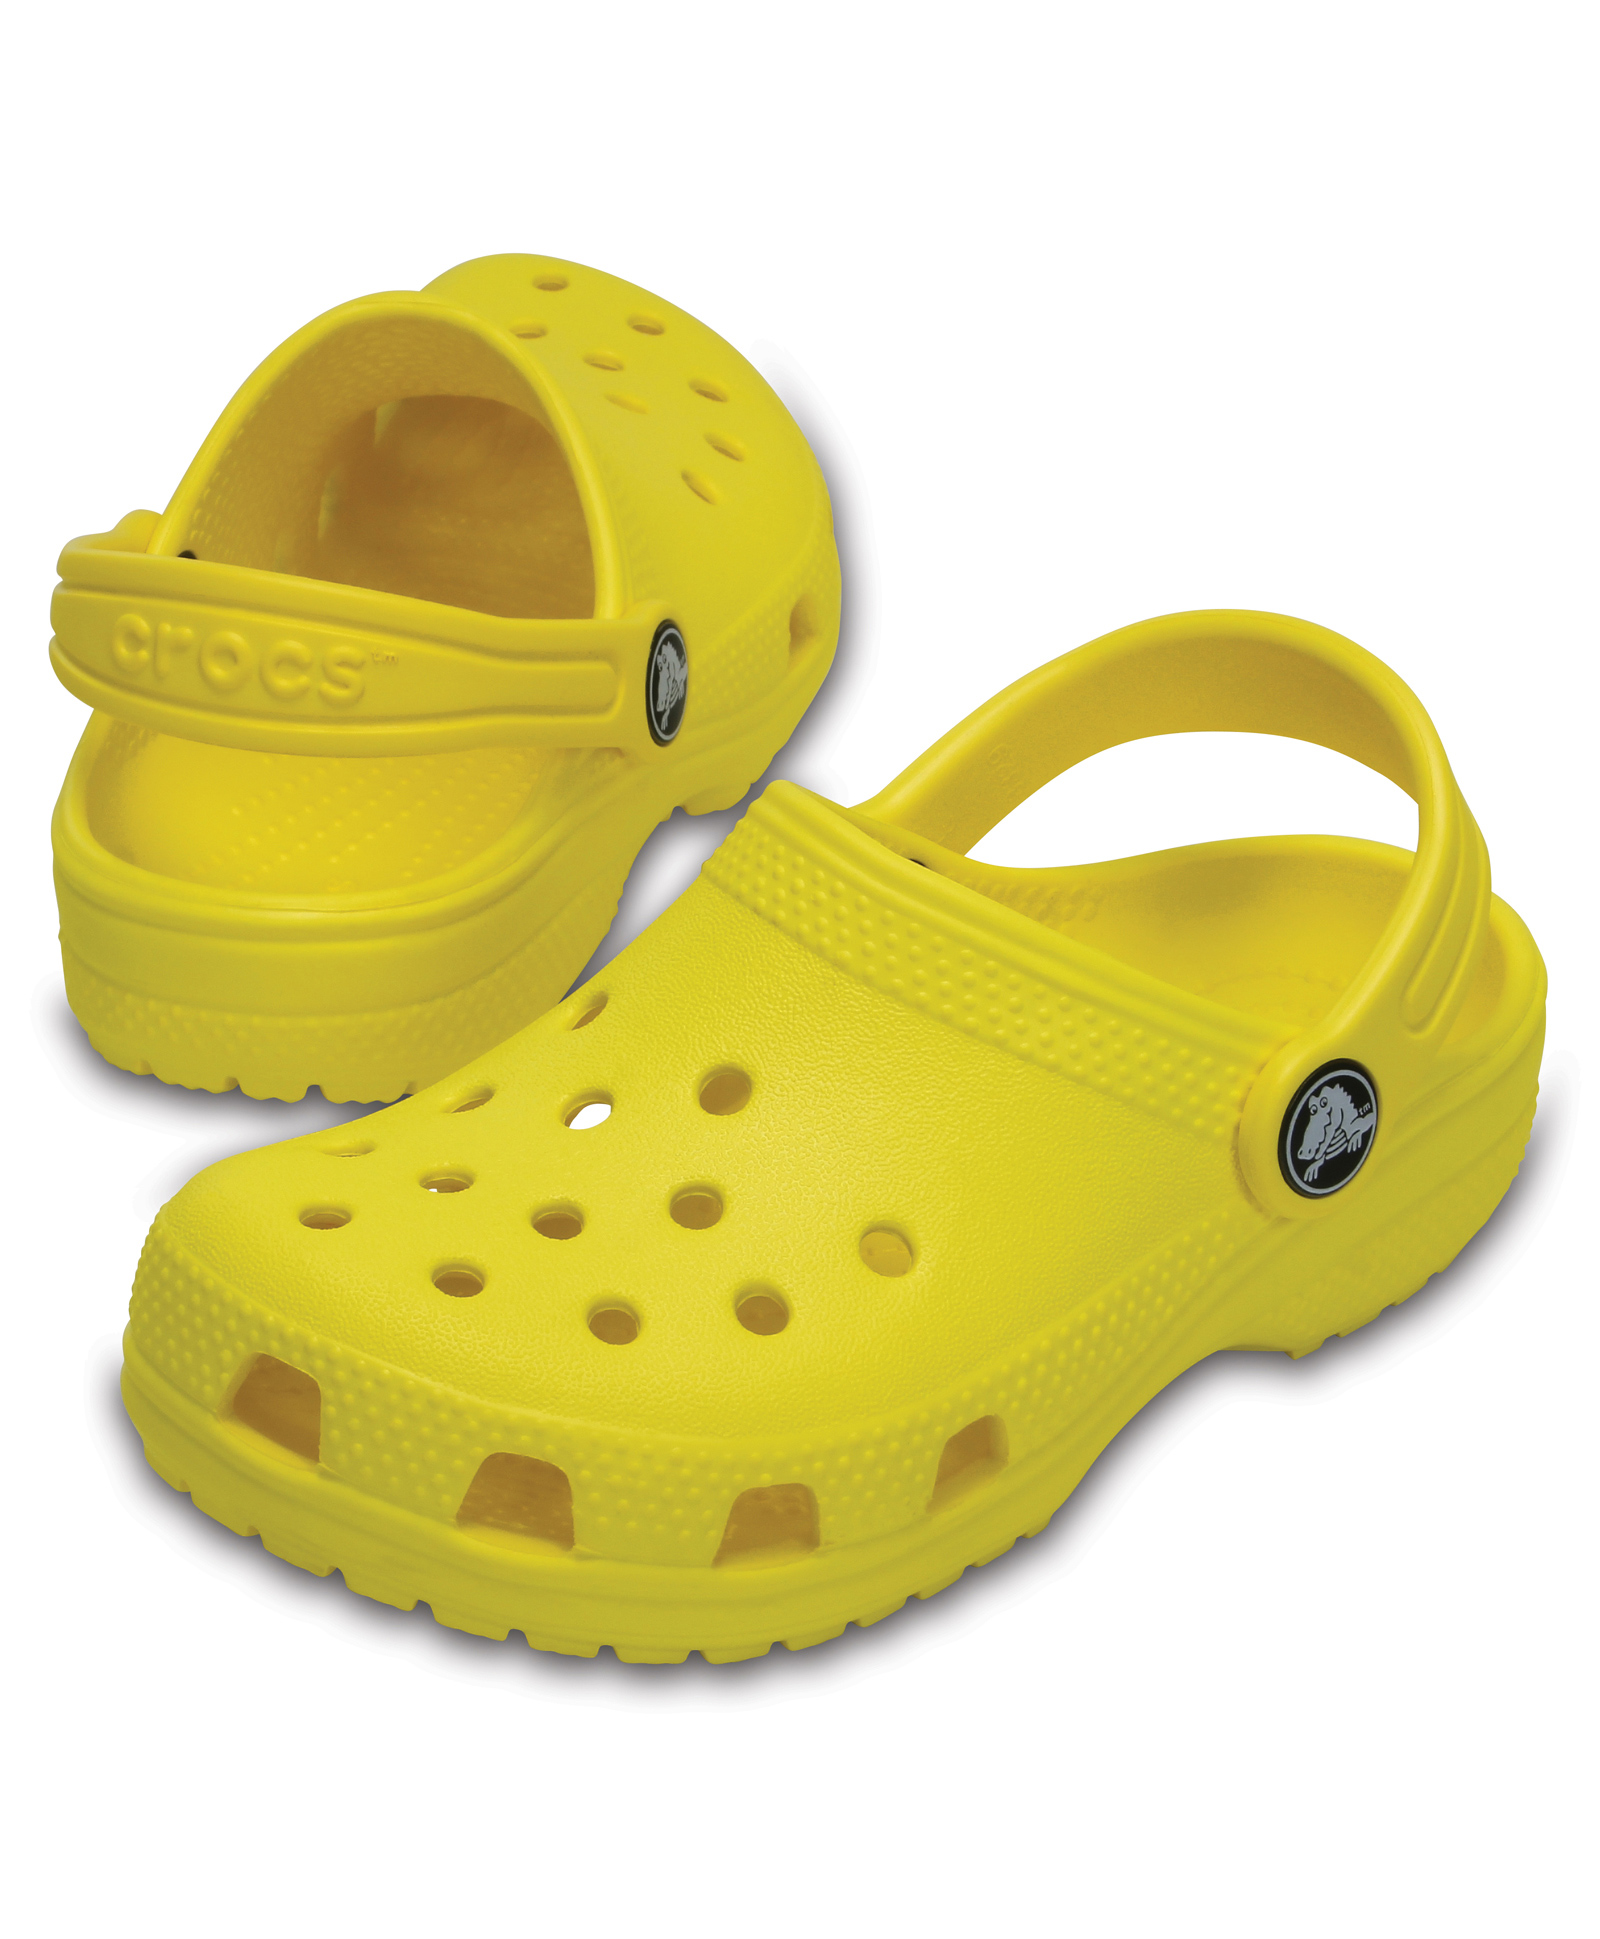 Crocs Classic Clogs K Yellow Online in UAE, Buy at Best Price from